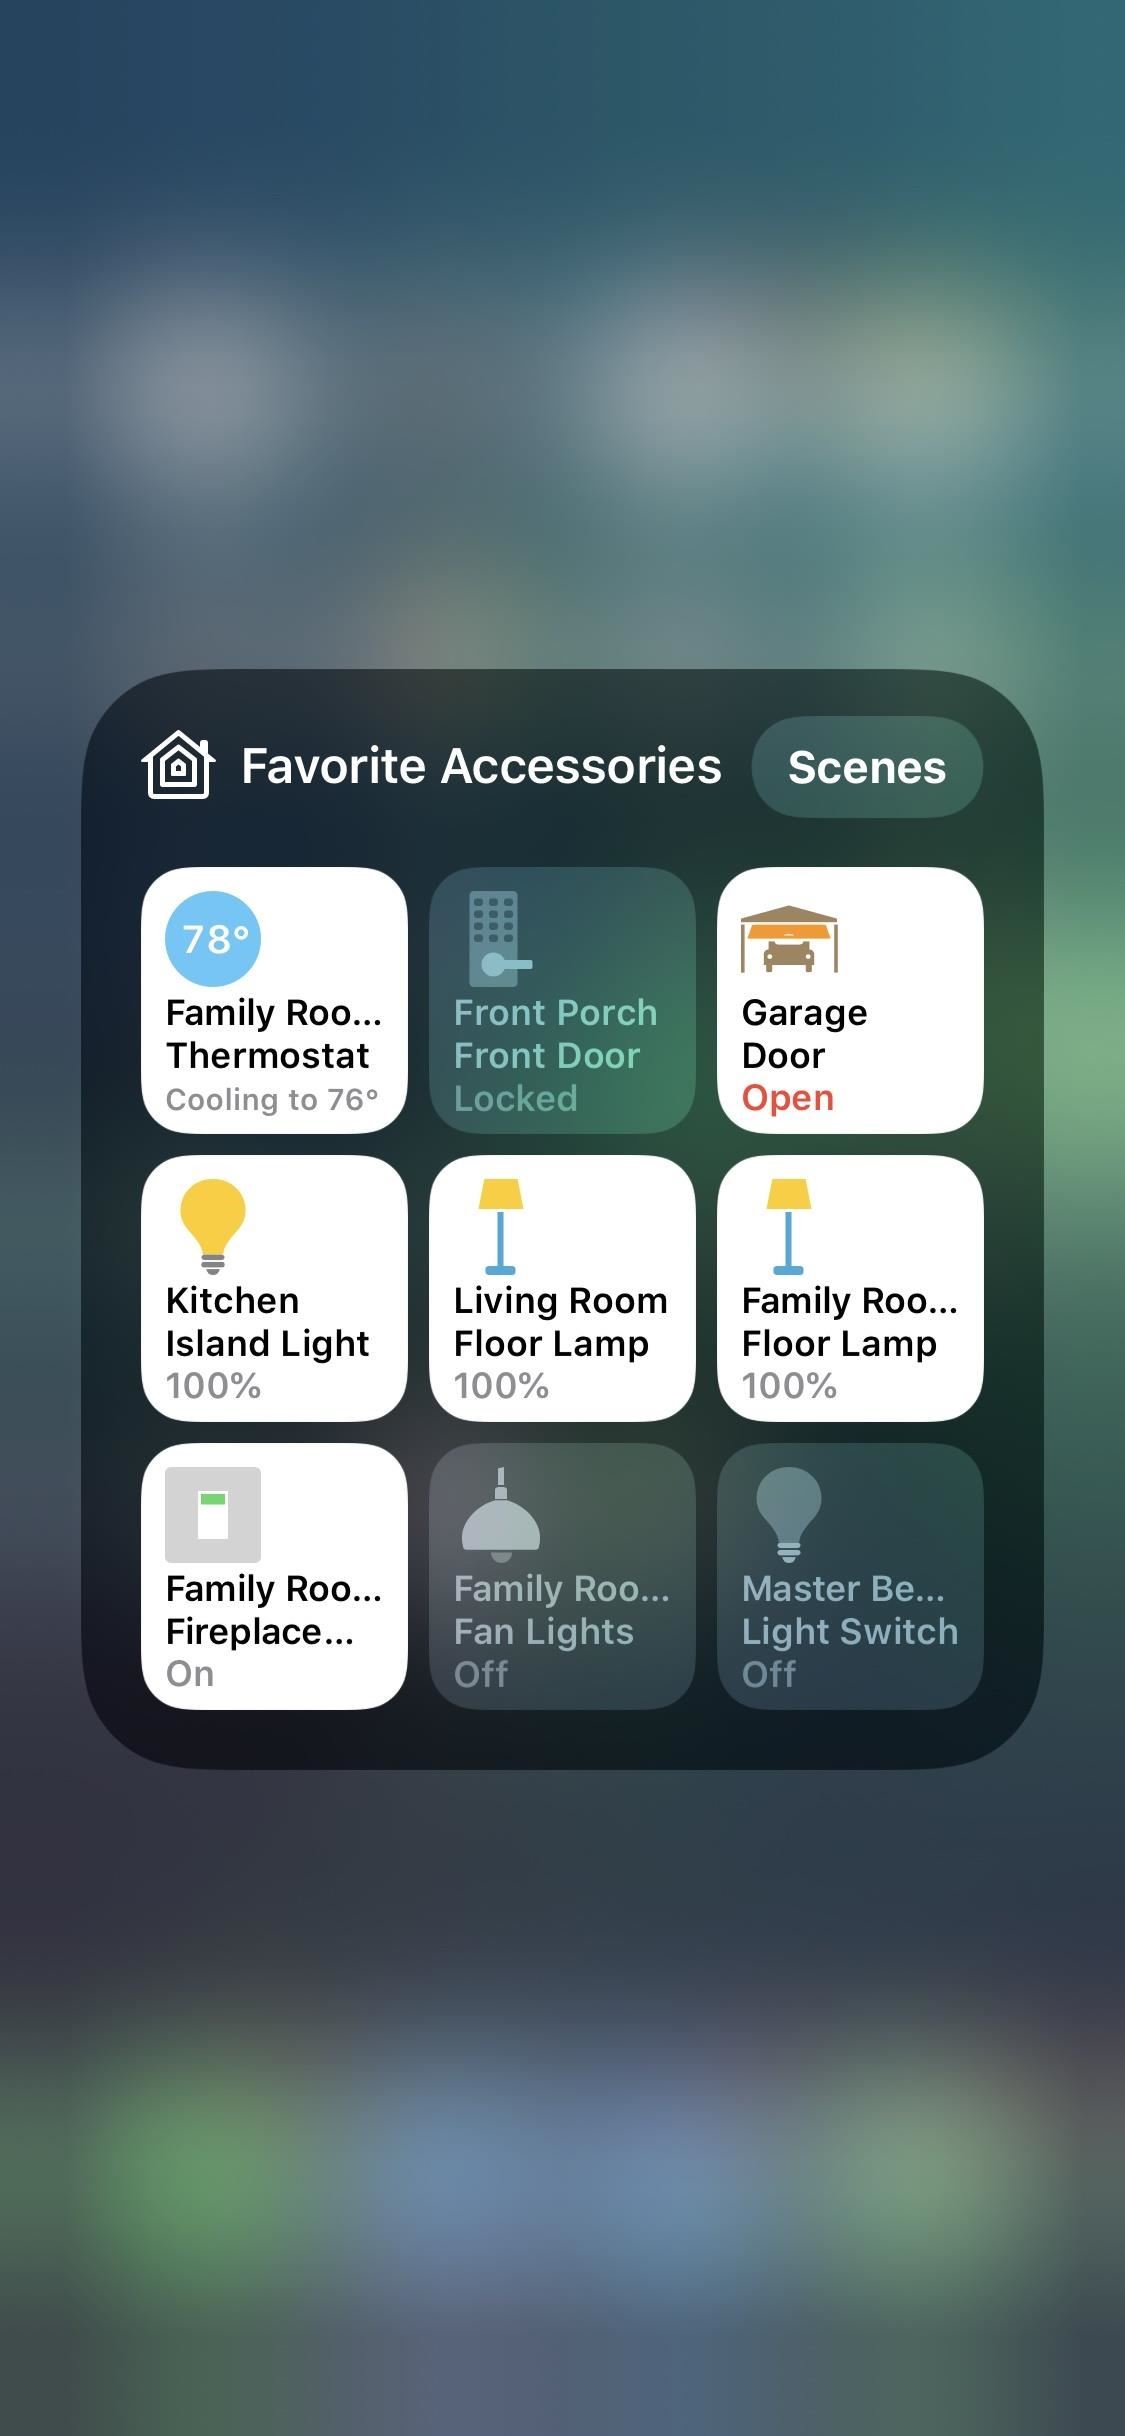 Every New Feature iOS 14 Brings to the Home App on Your iPhone